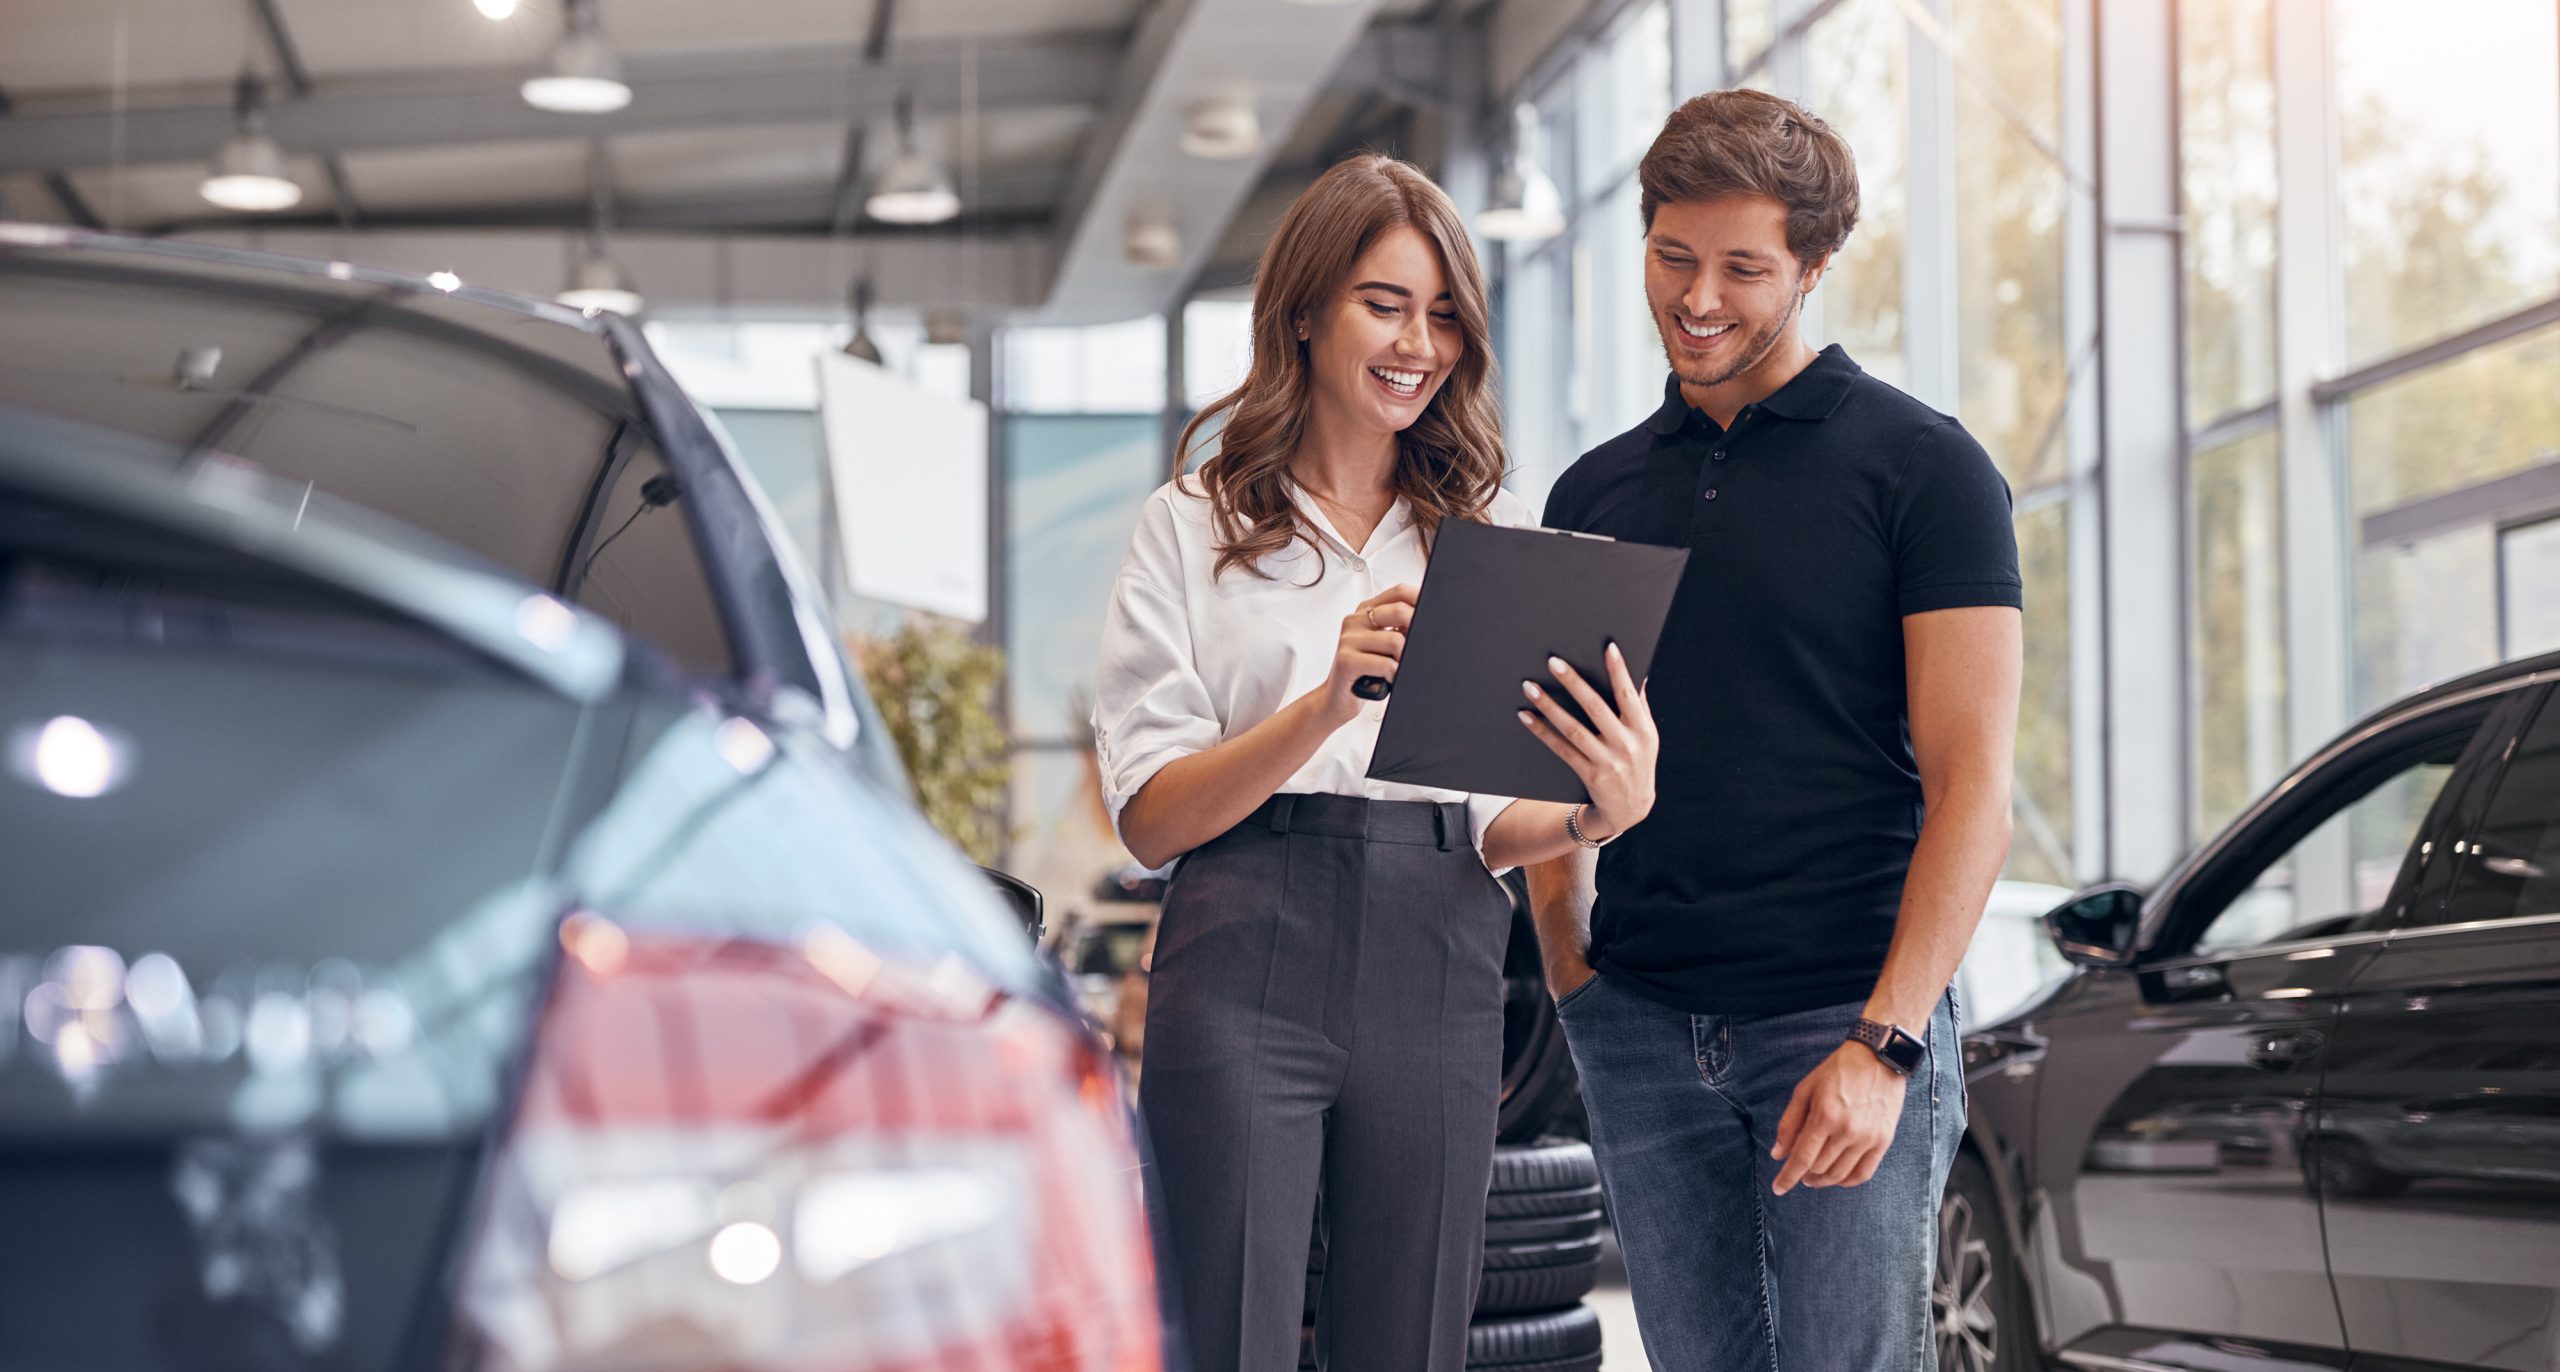 Purchasing a new vehicle became easier in July, according to Cox Automotive, as the post-pandemic car market continue to normalize.